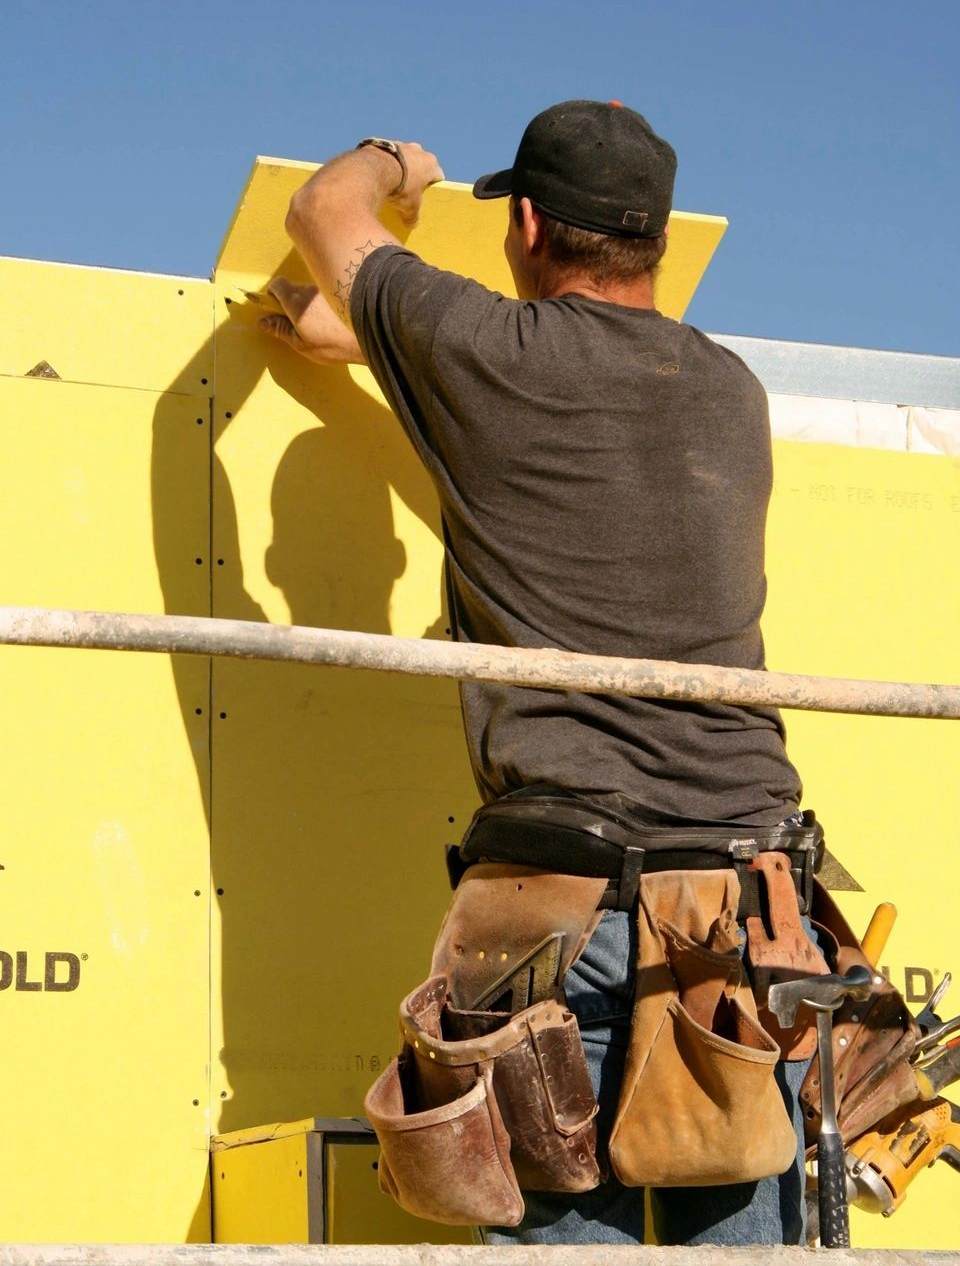 A man in brown pants and hat painting a wall.